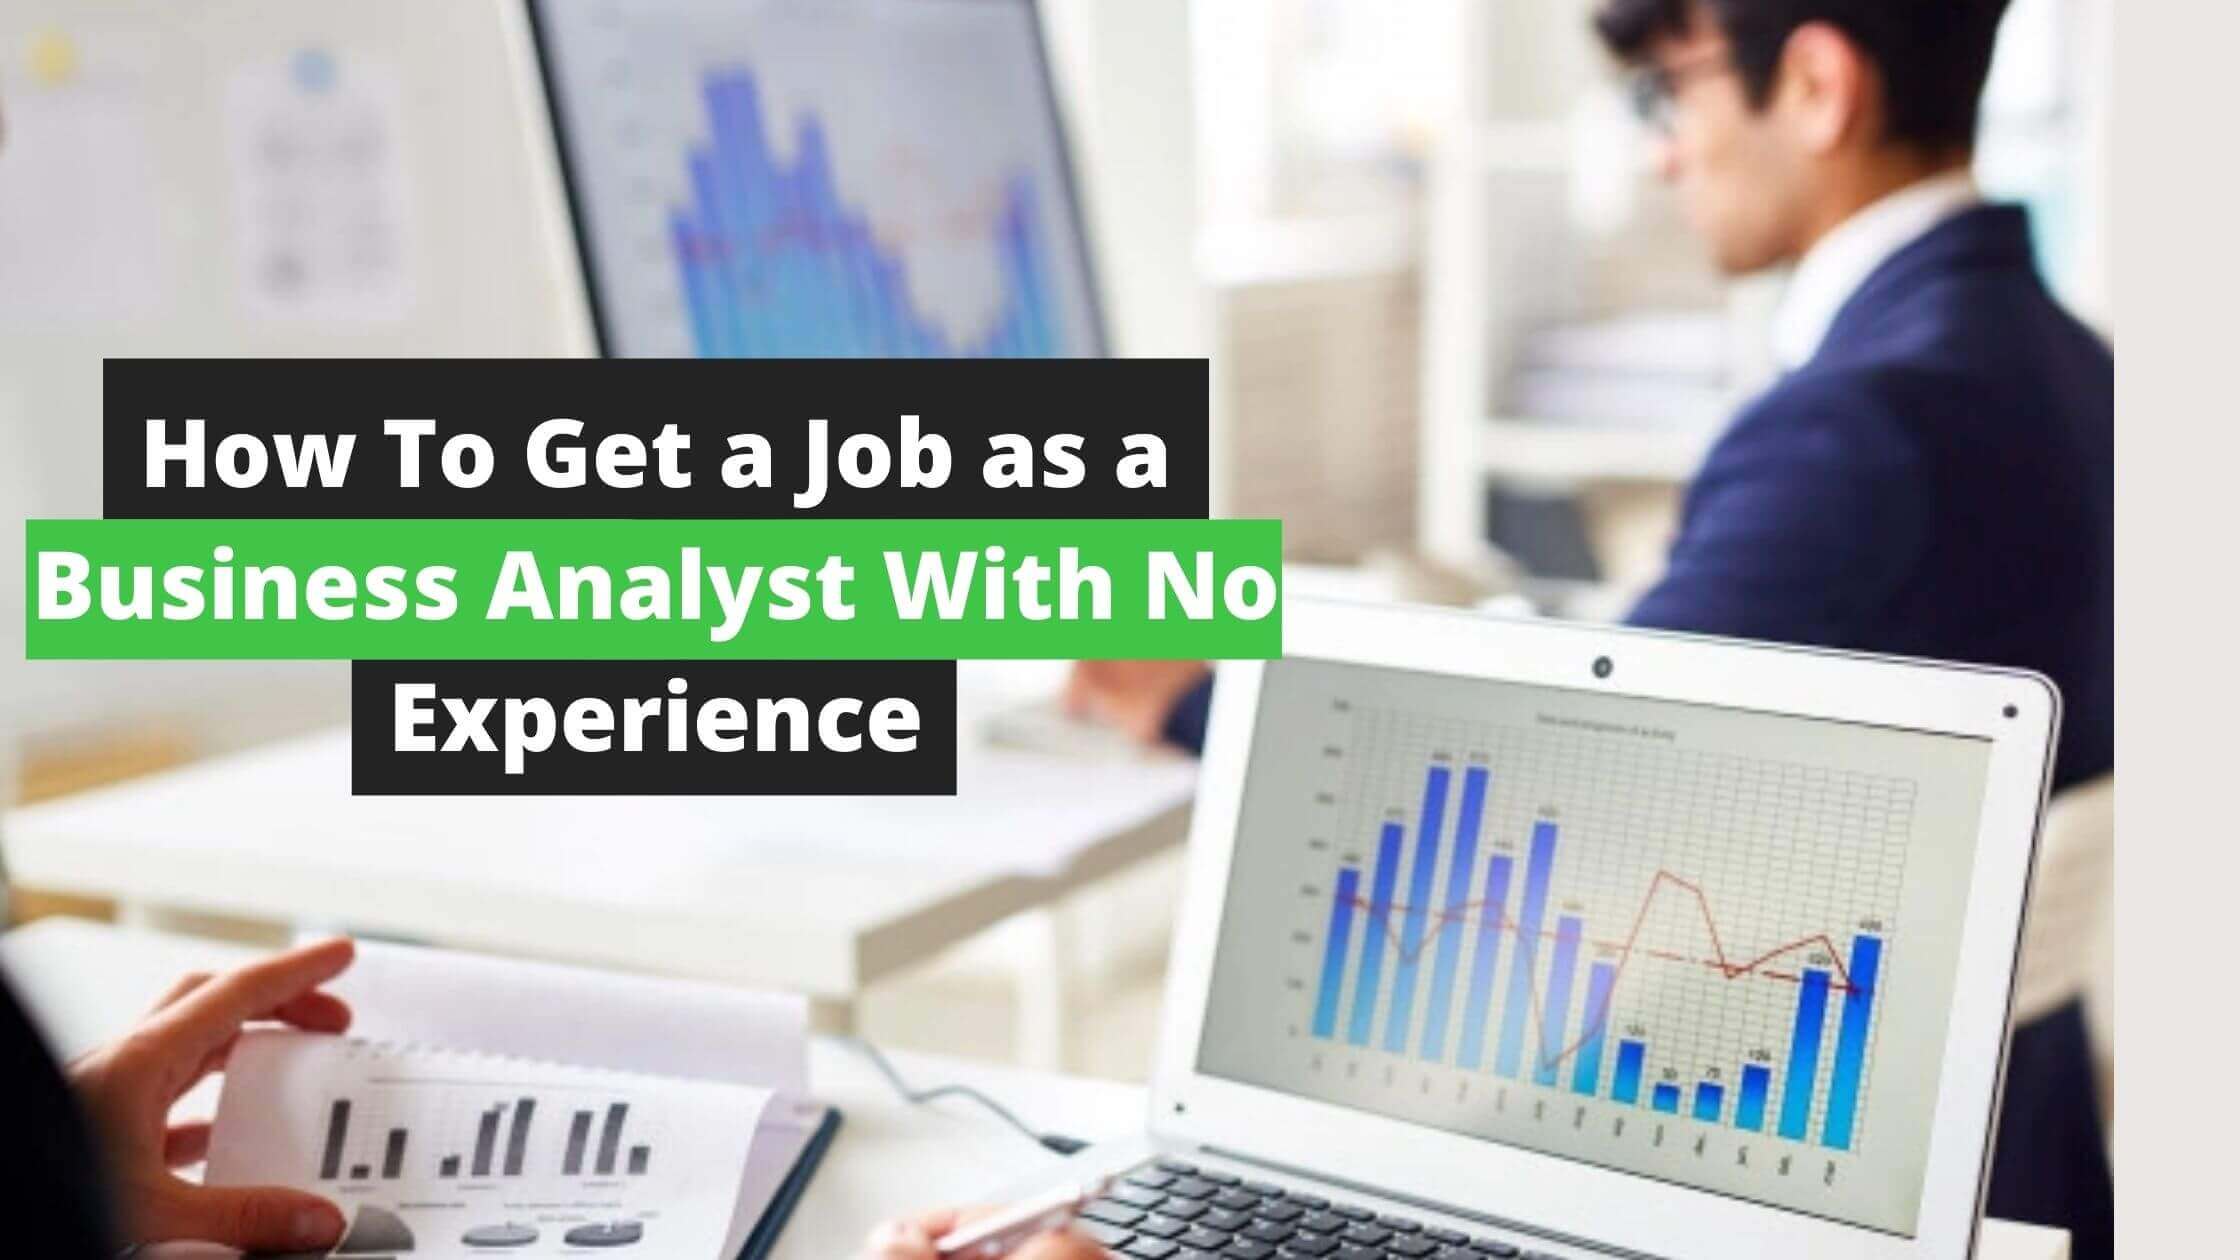 How To Get a Job as a Business Analyst With No Experience